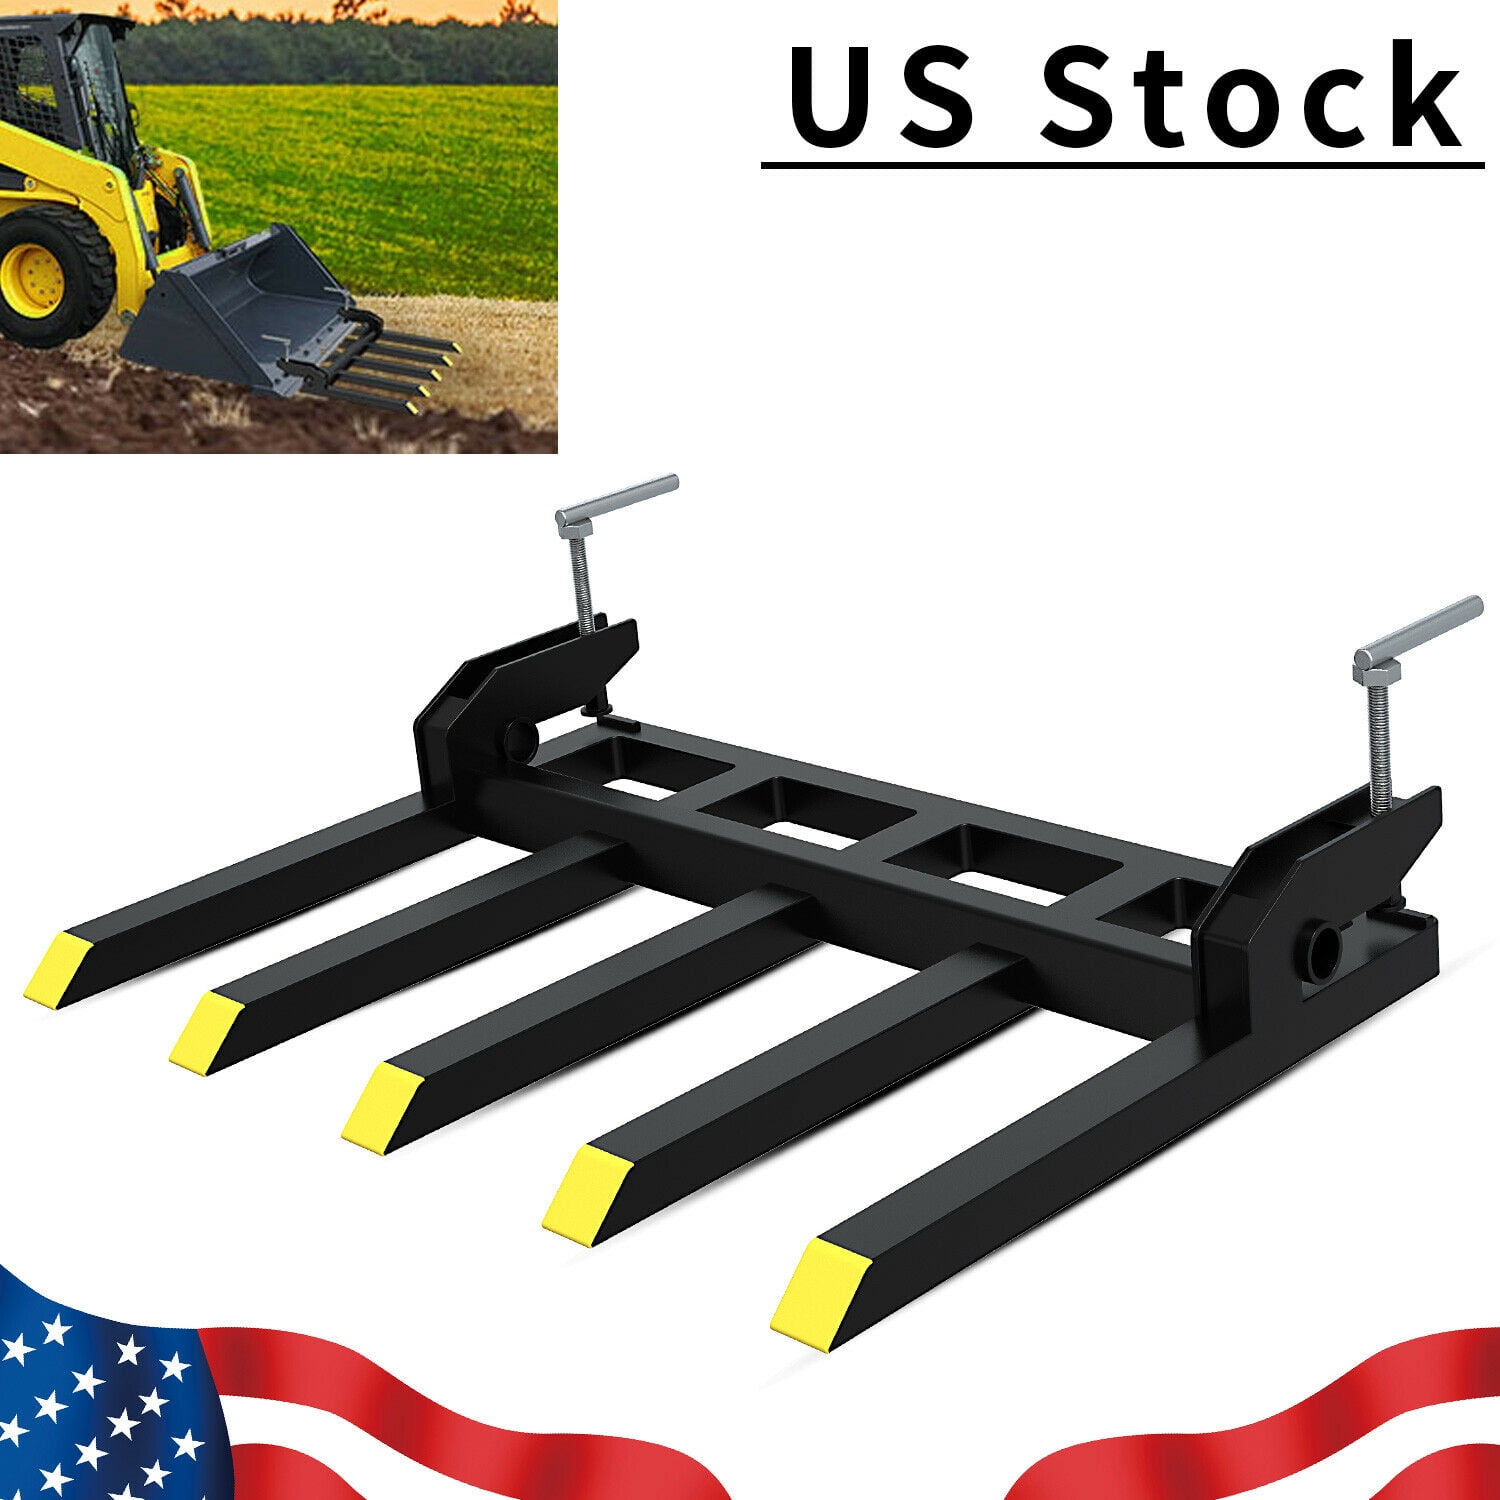 YITAMOTOR Clamp on Debris Forks to 48" Bucket, Heavy Duty Pallet Fork